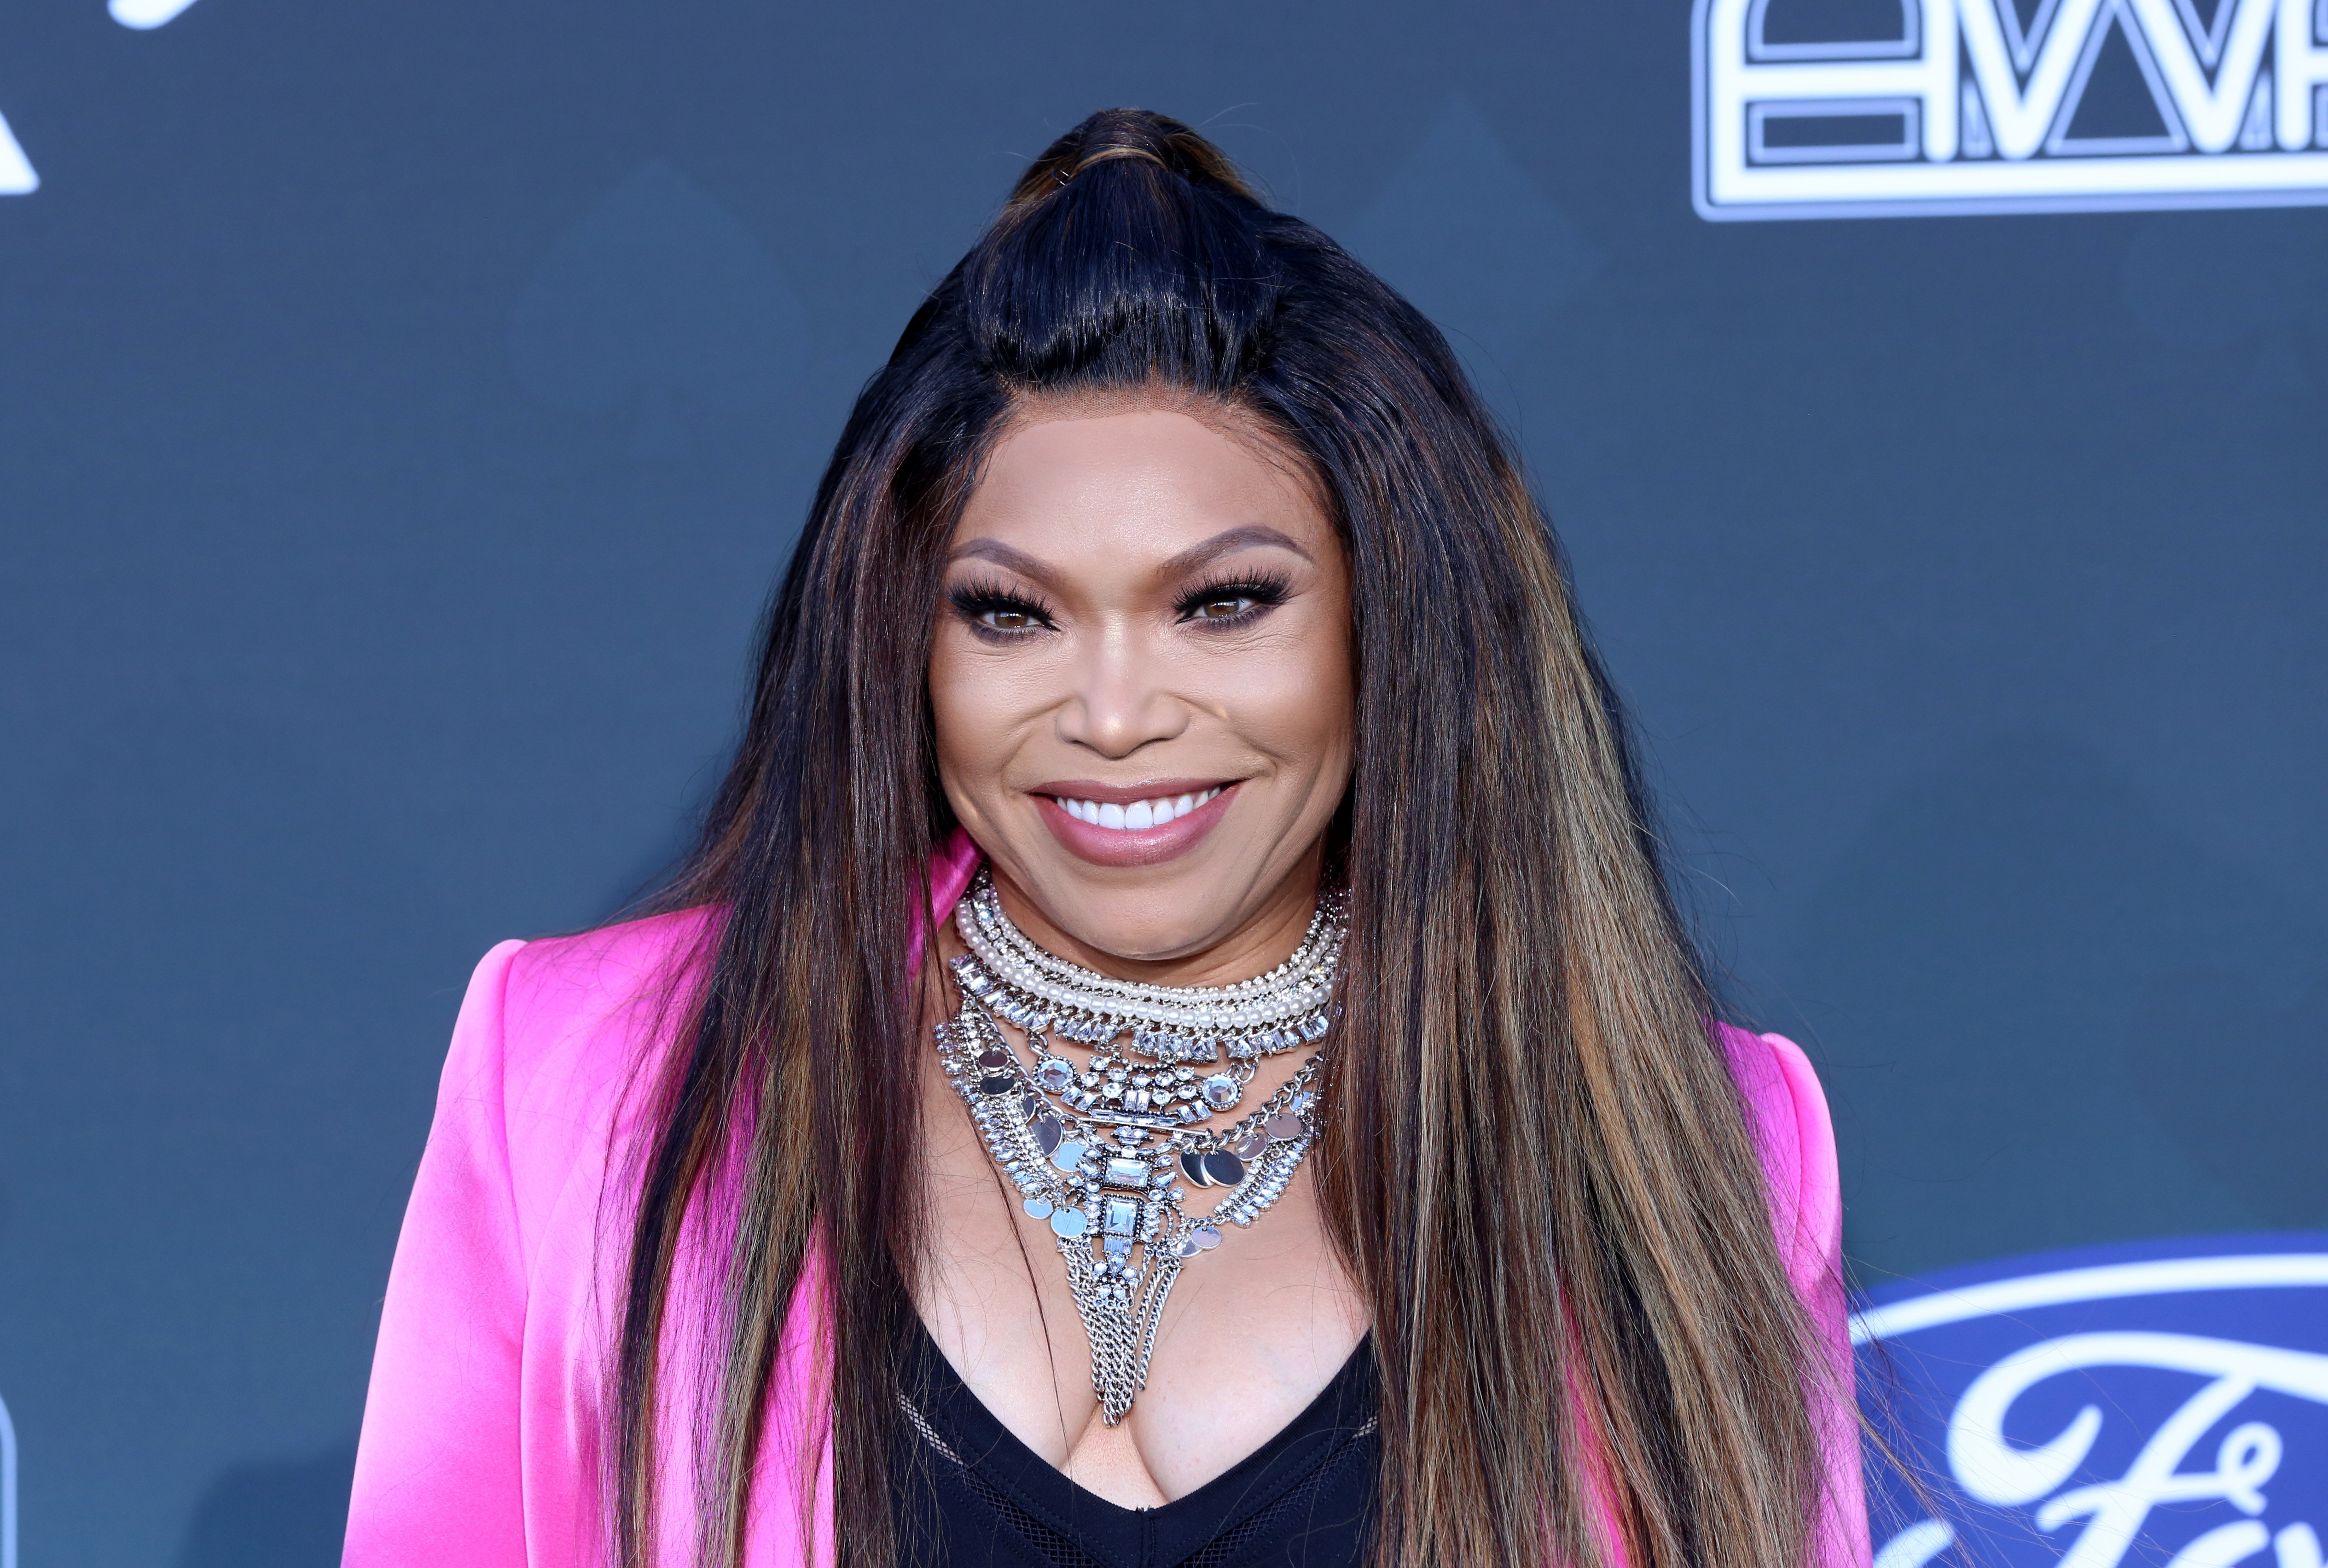 Tisha Campbell attends the Soul Train Awards in November 2019 in Las Vegas, Nevada. | Photo: Getty Images